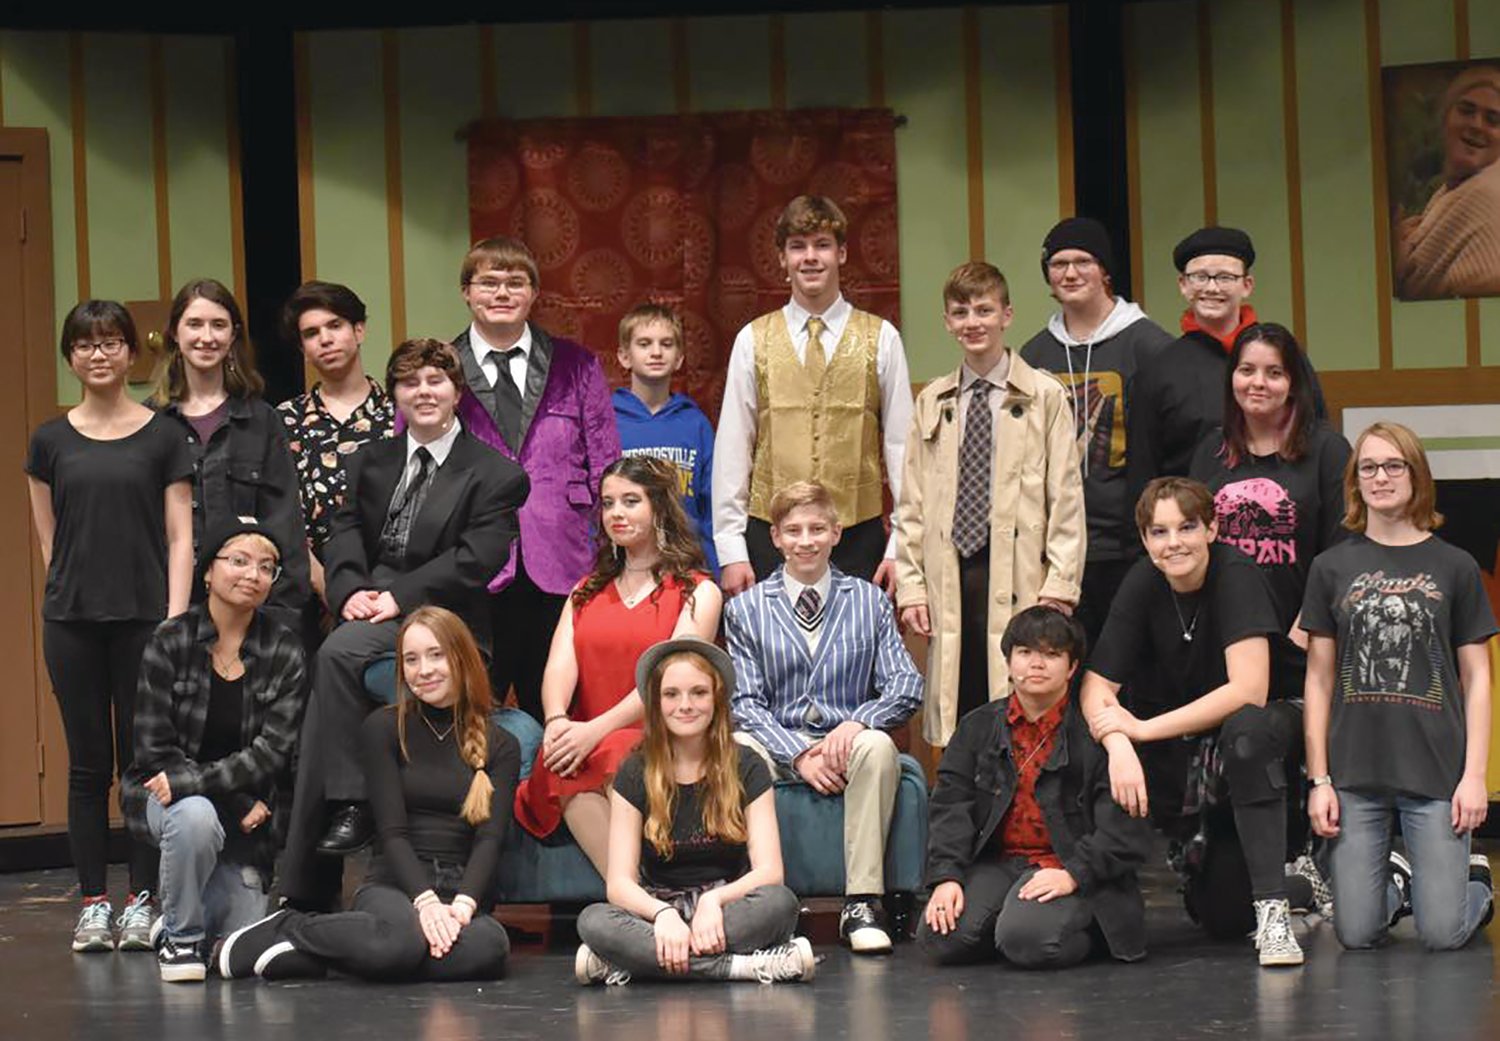 The cast of "The Play That Goes Wrong" takes the stage this weekend in Connie L. Meek Auditorium at Crawfordsville High School.